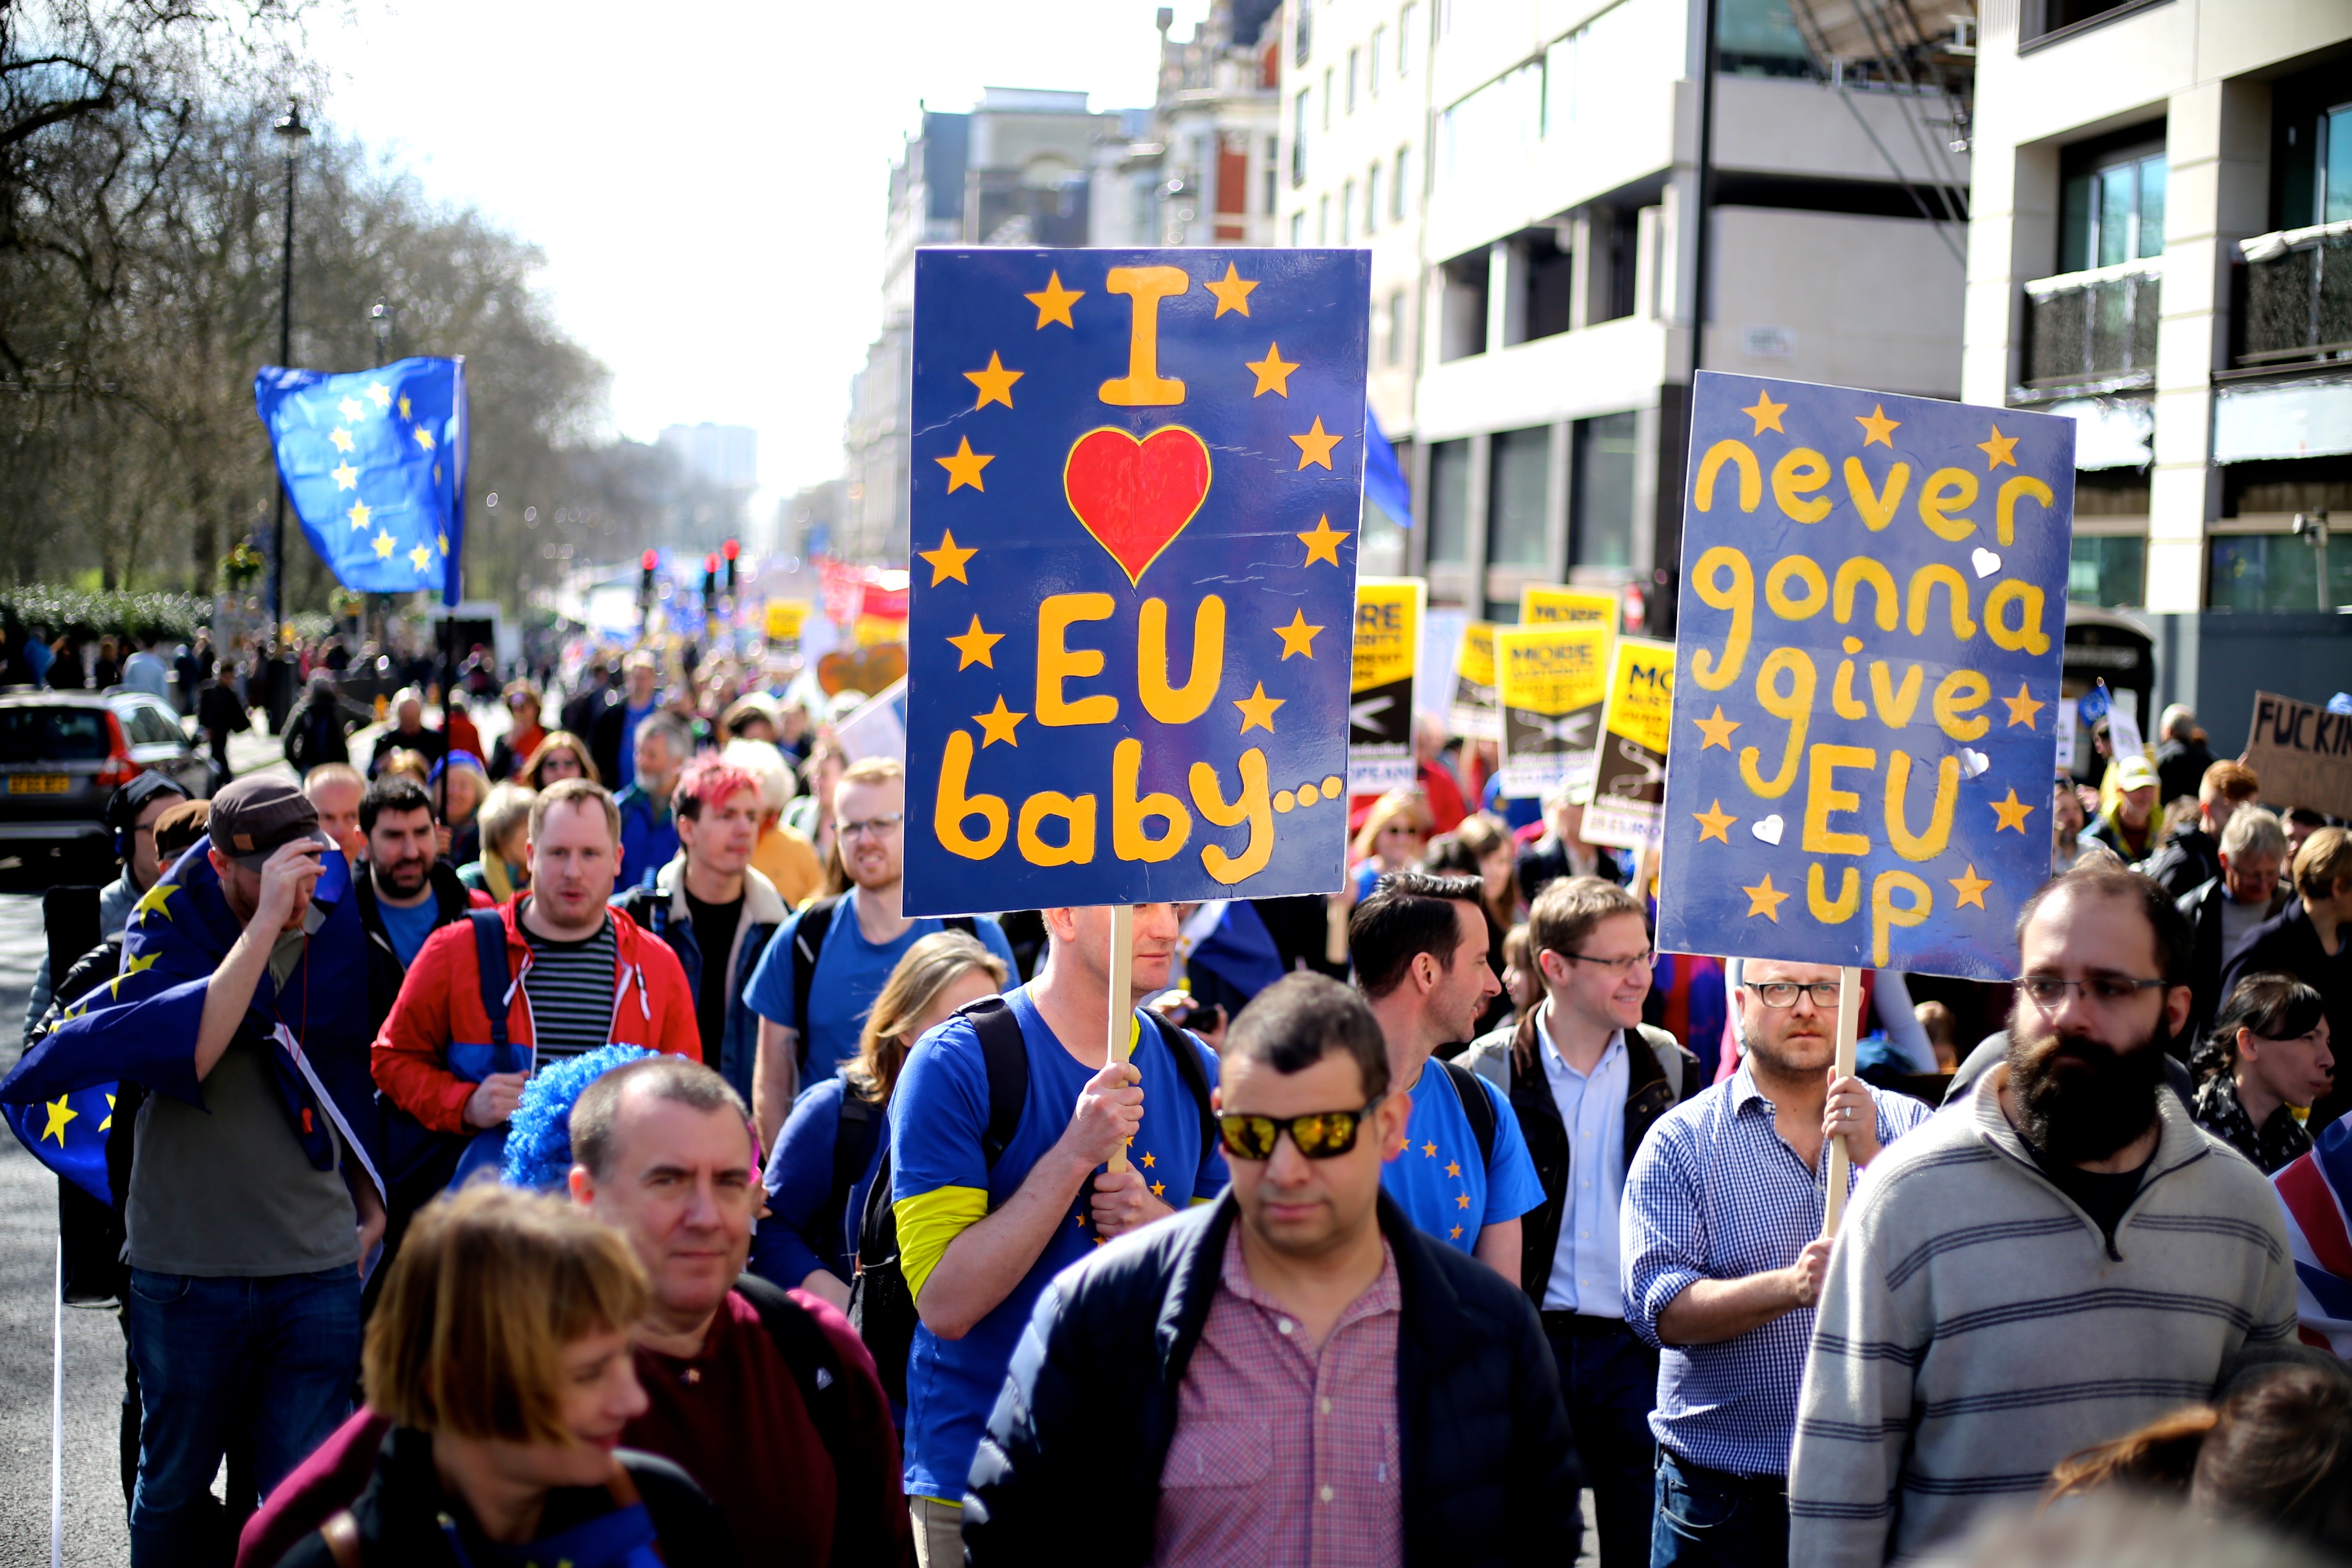 At a protest march against Brexit in London. Photo © Wikimedia Commons